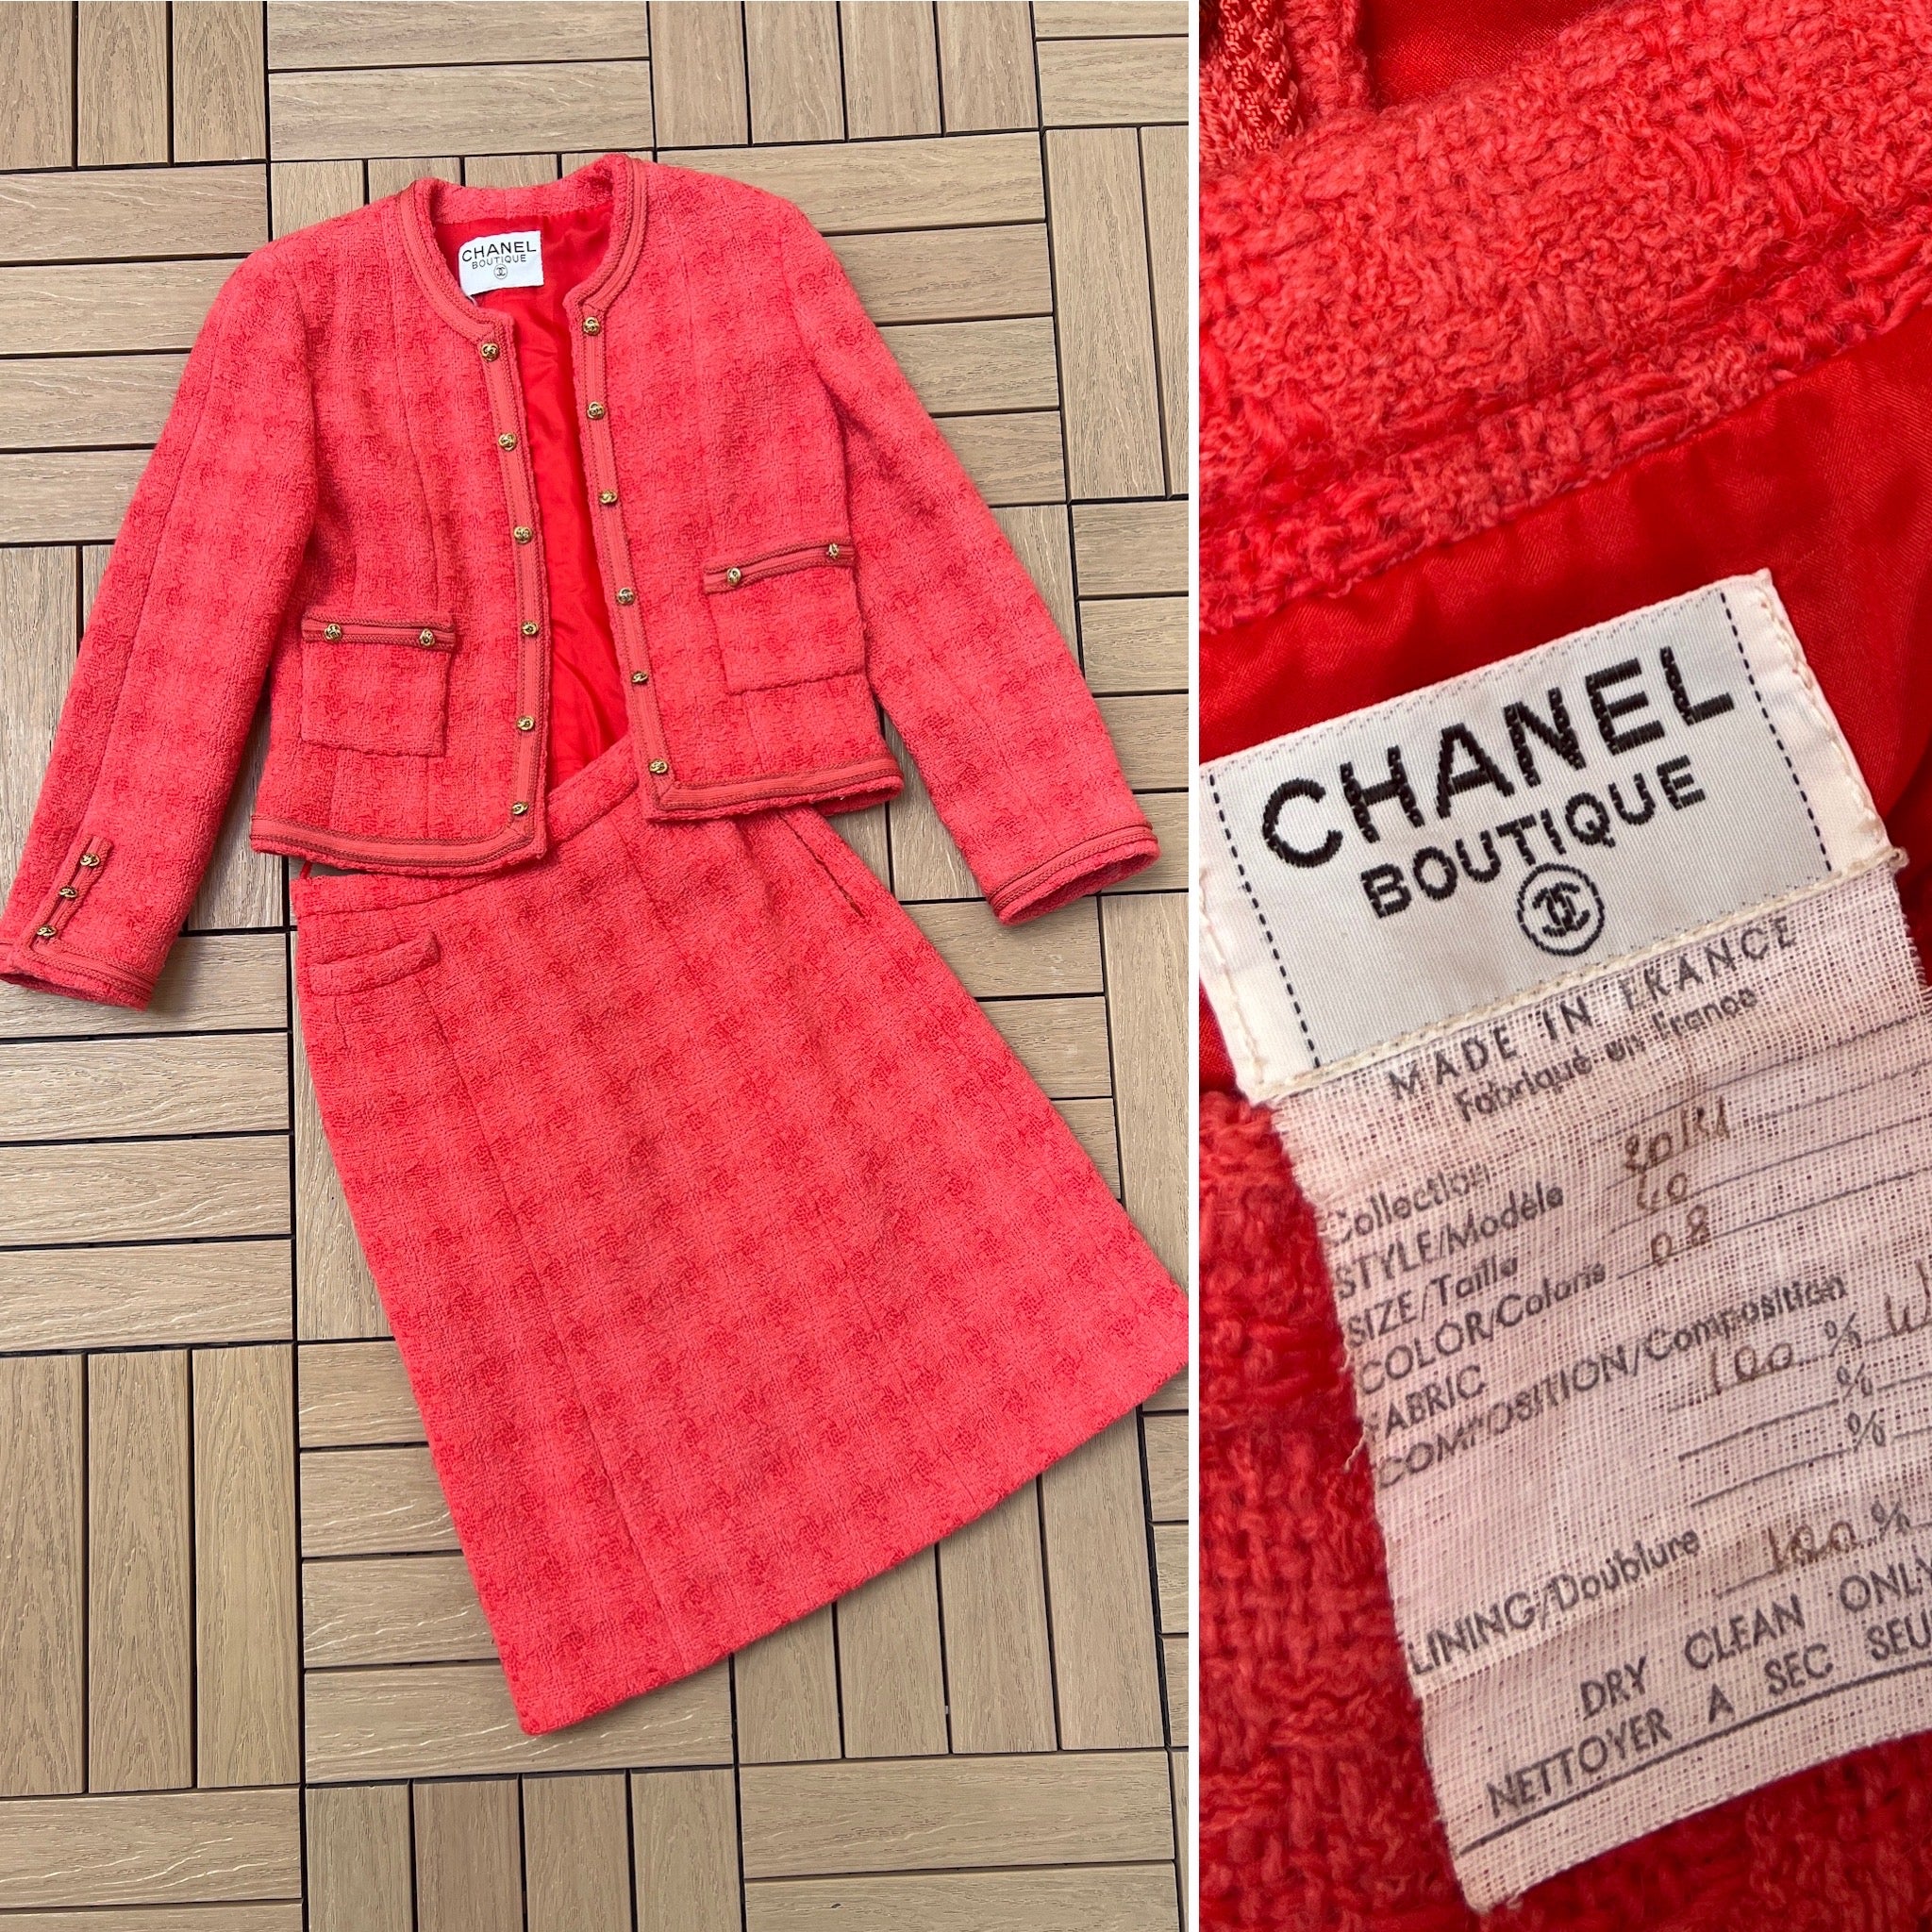 Vintage 90s Chanel Boutique Coral Red Wool Tweed Skirt Suit By